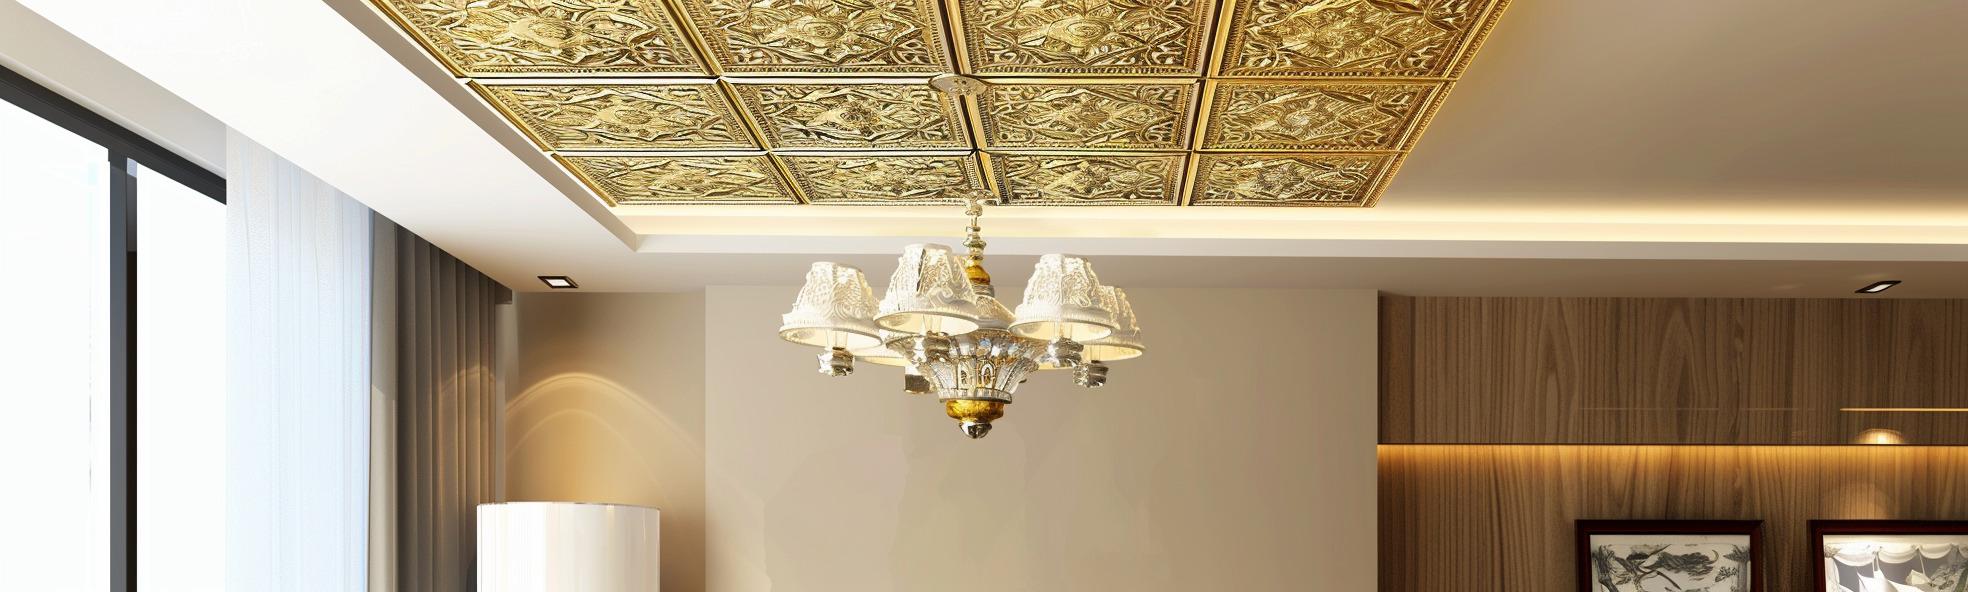 Sculpted Elegance in Our 3D Relief Ceiling Panels